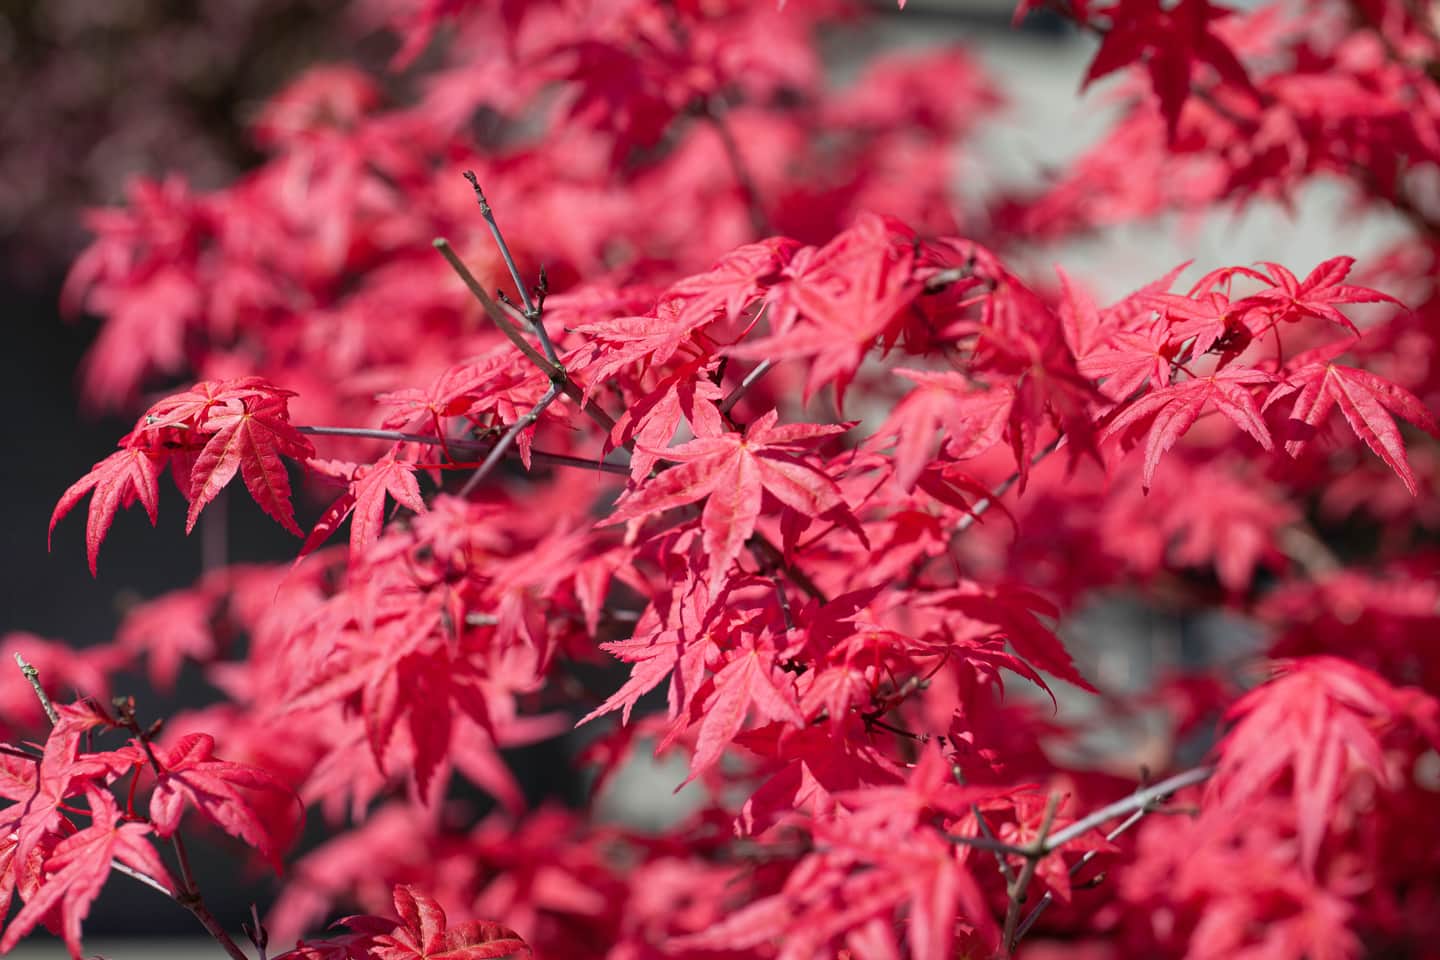 Fireglow Japanese maple with red leaves in fall.